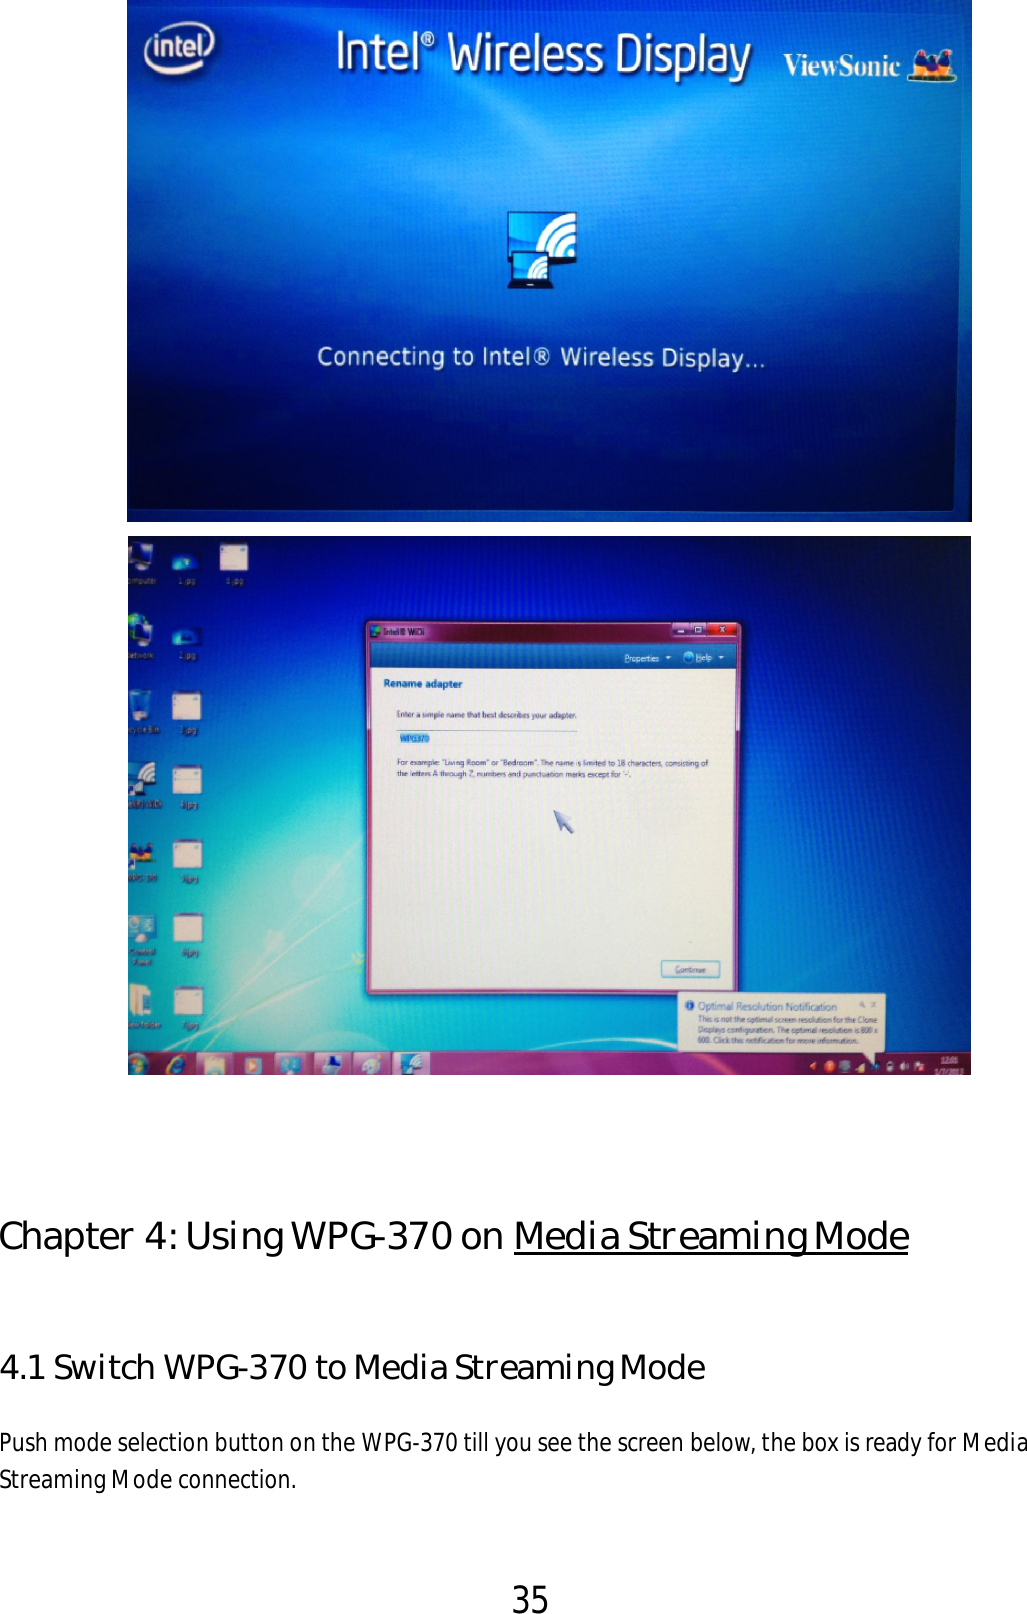 35      Chapter 4: Using WPG-370 on Media Streaming Mode 4.1 Switch WPG-370 to Media Streaming Mode Push mode selection button on the WPG-370 till you see the screen below, the box is ready for Media Streaming Mode connection.   